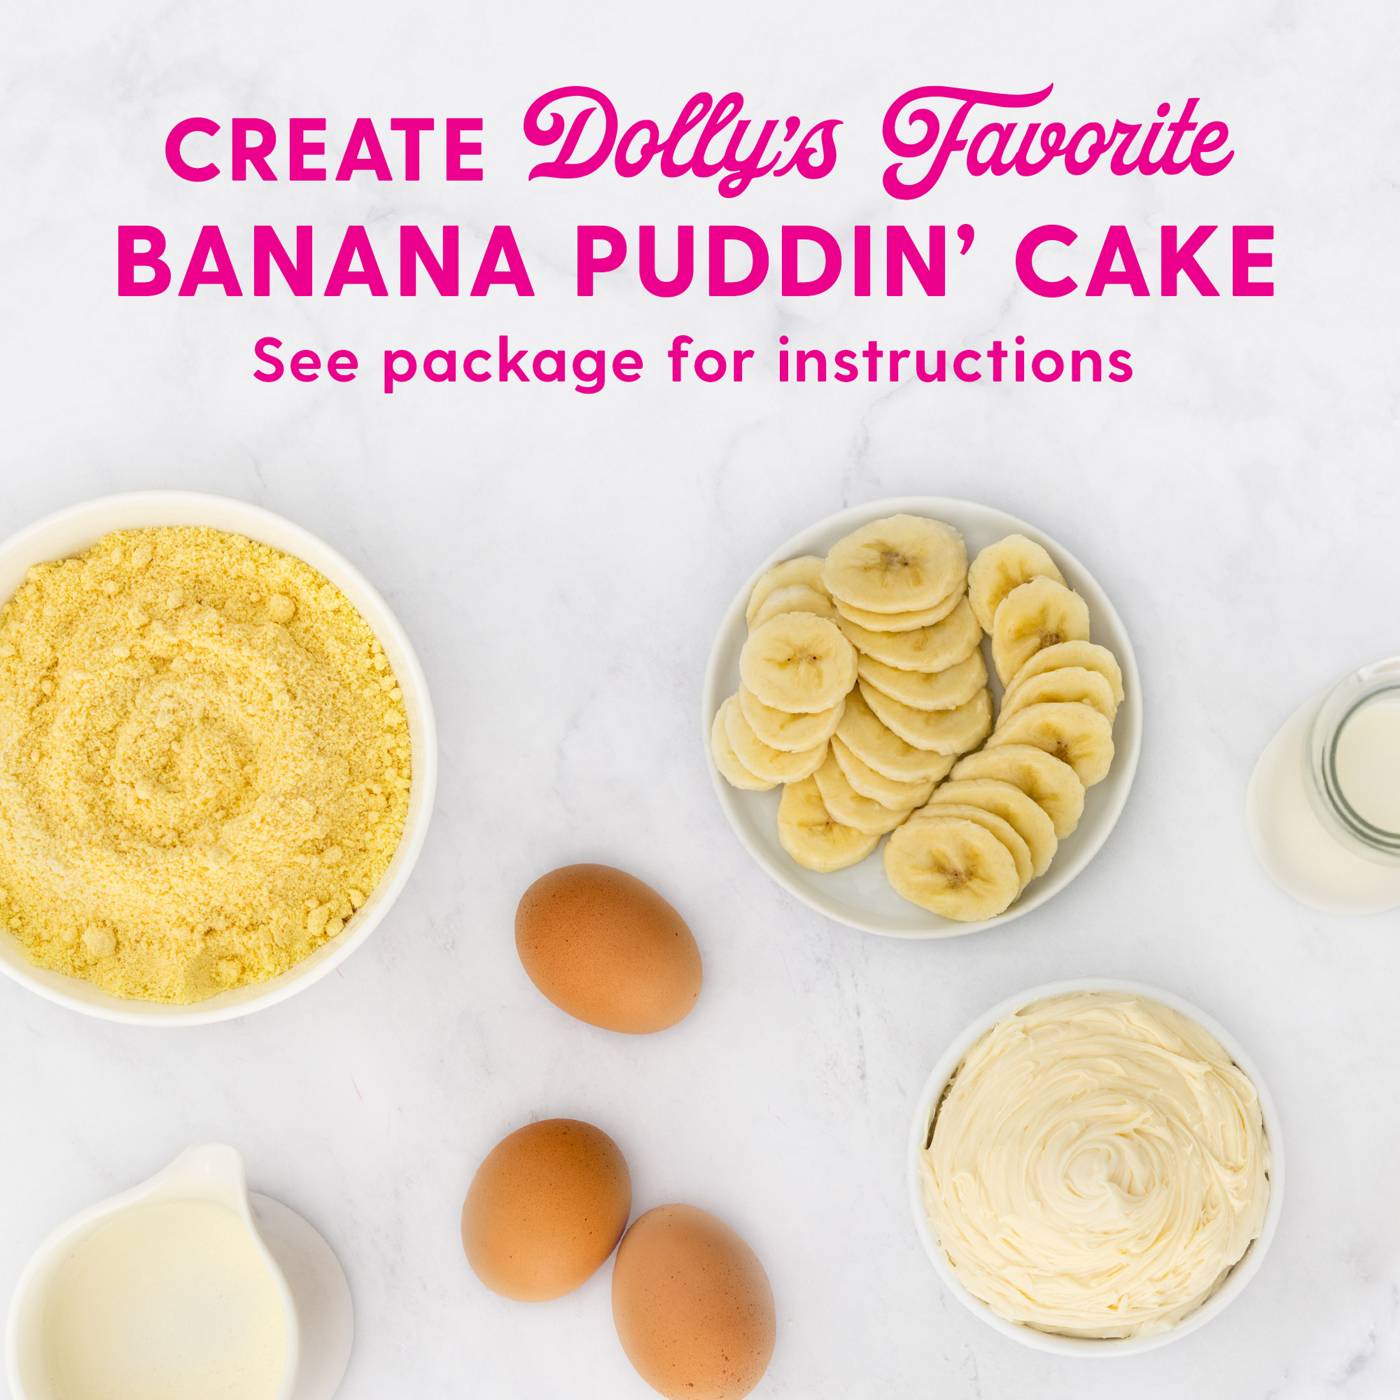 Duncan Hines Dolly Parton's Favorite Southern-Style Banana Flavored Cake Mix; image 5 of 7